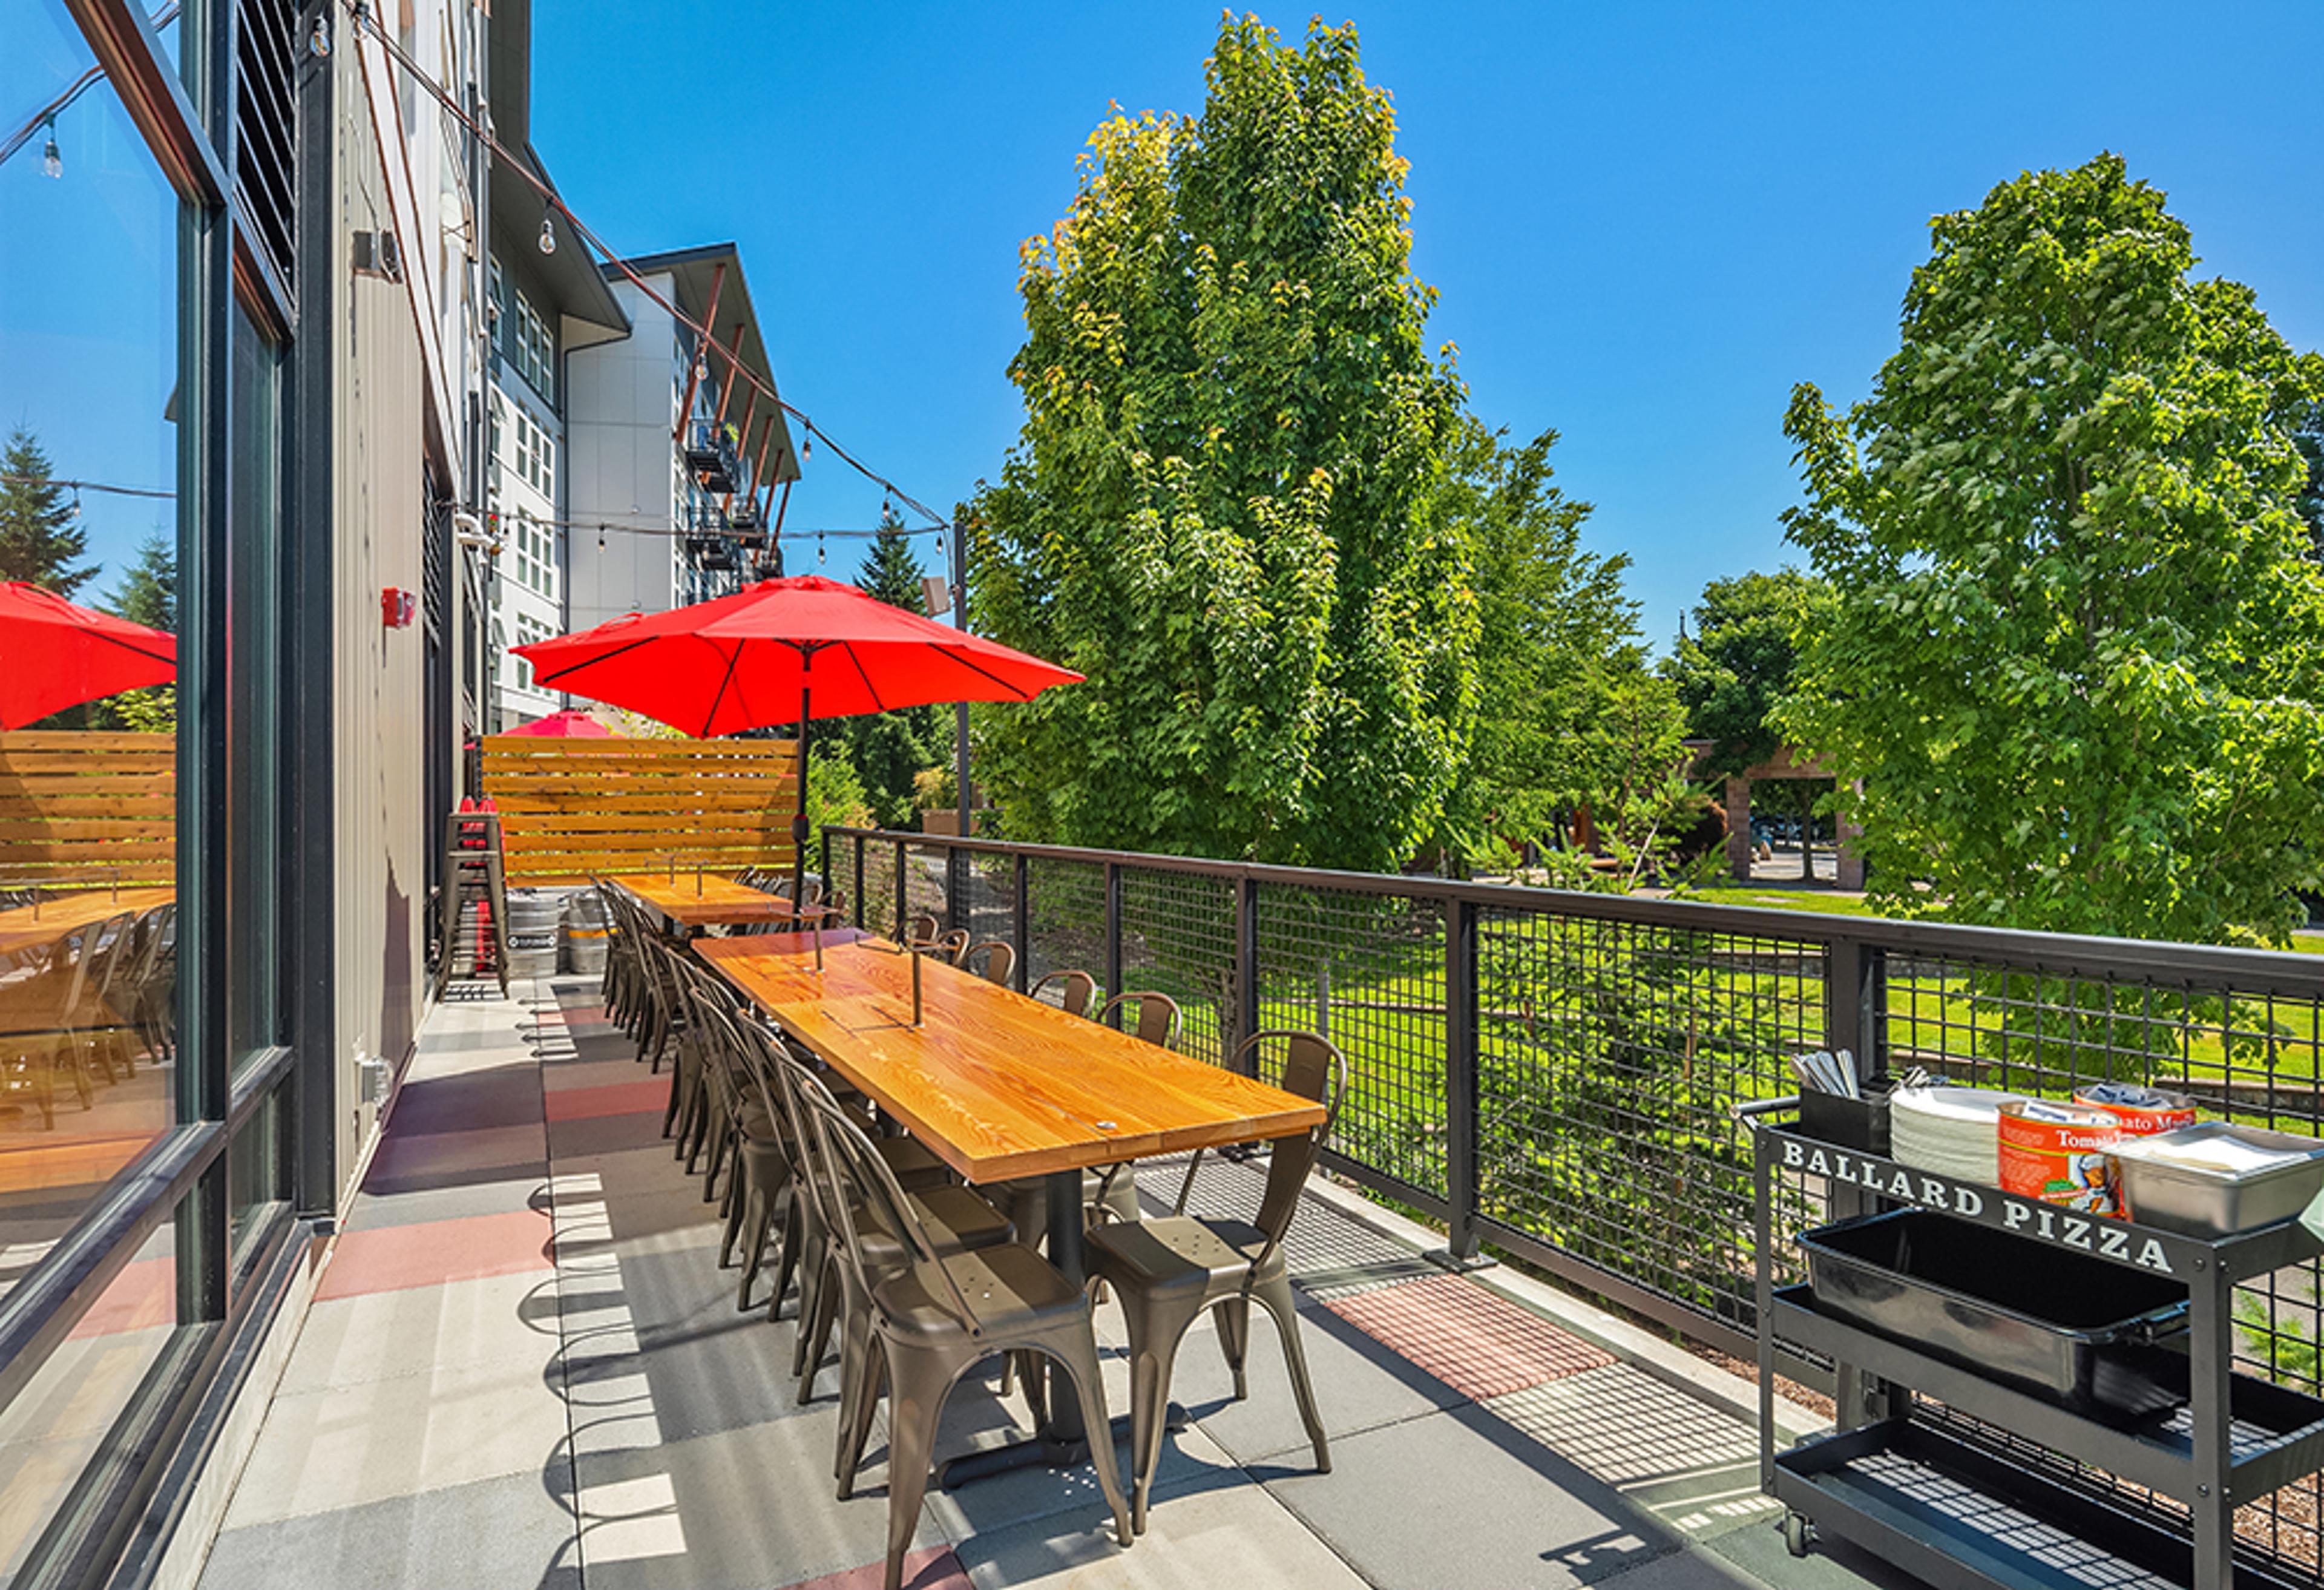 long patio table with tree views and red umbrella for shade